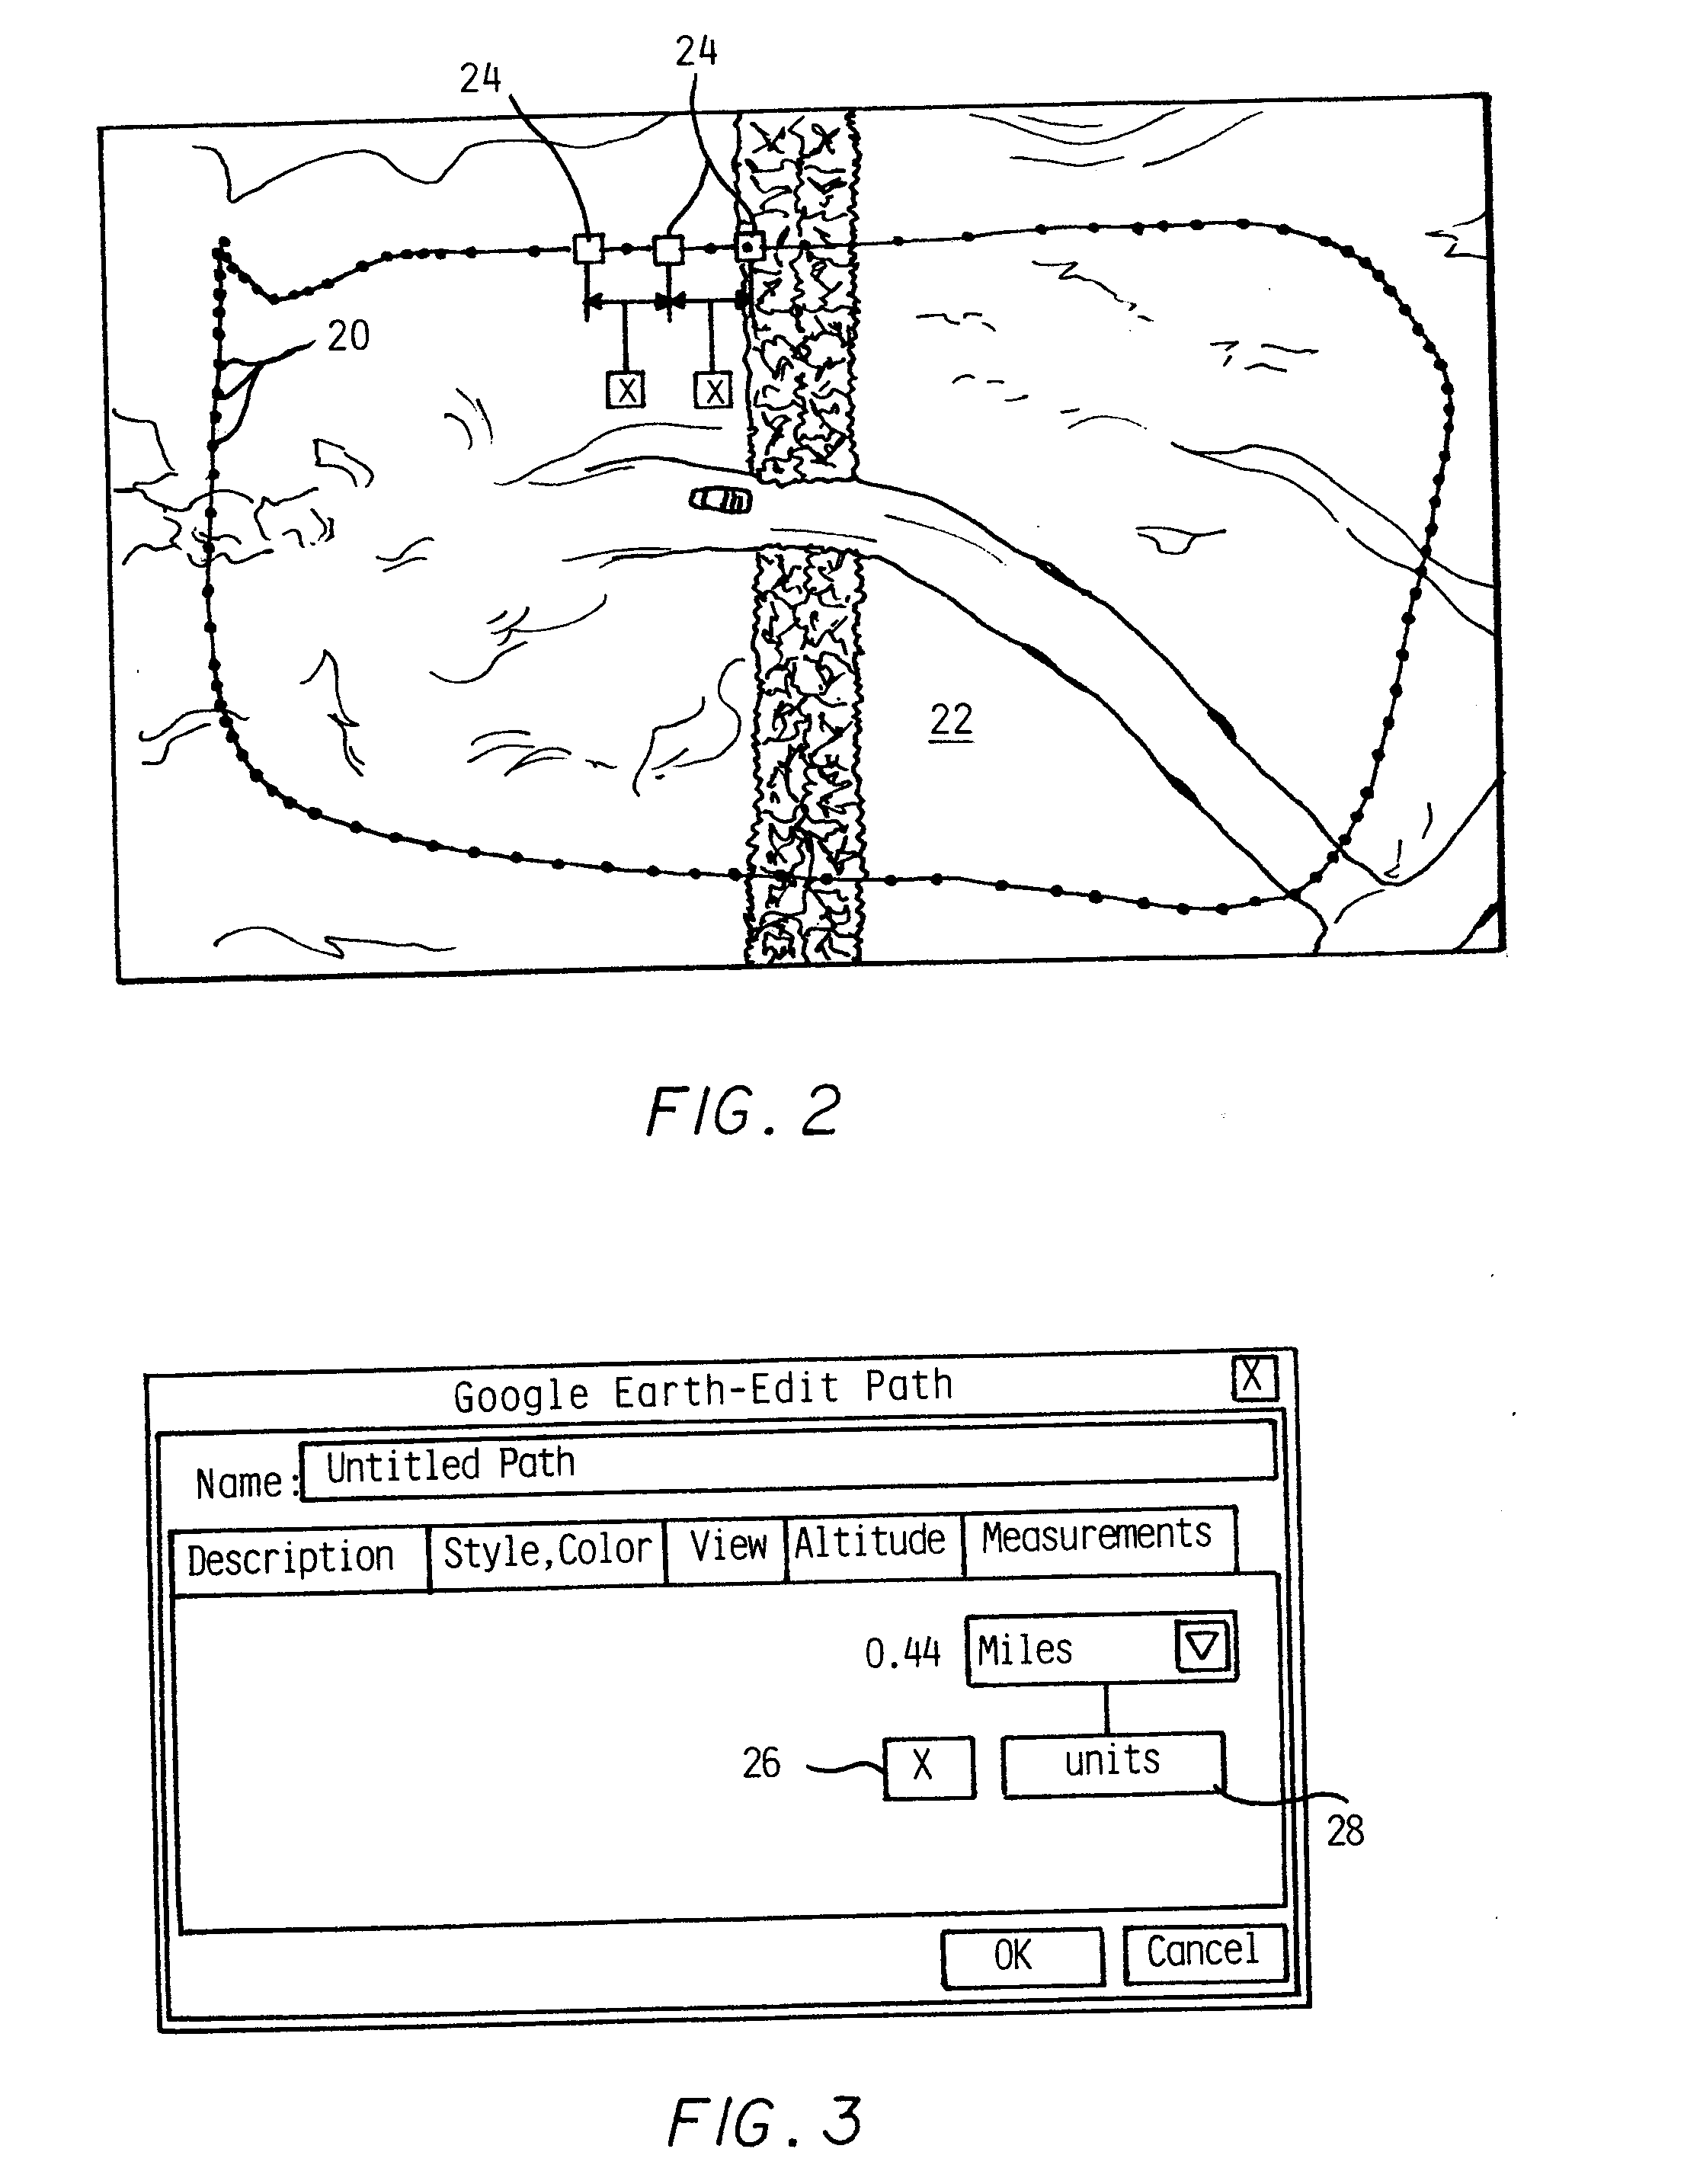 Method of Carrying Out Land Based Projects Using Aerial Imagery Programs